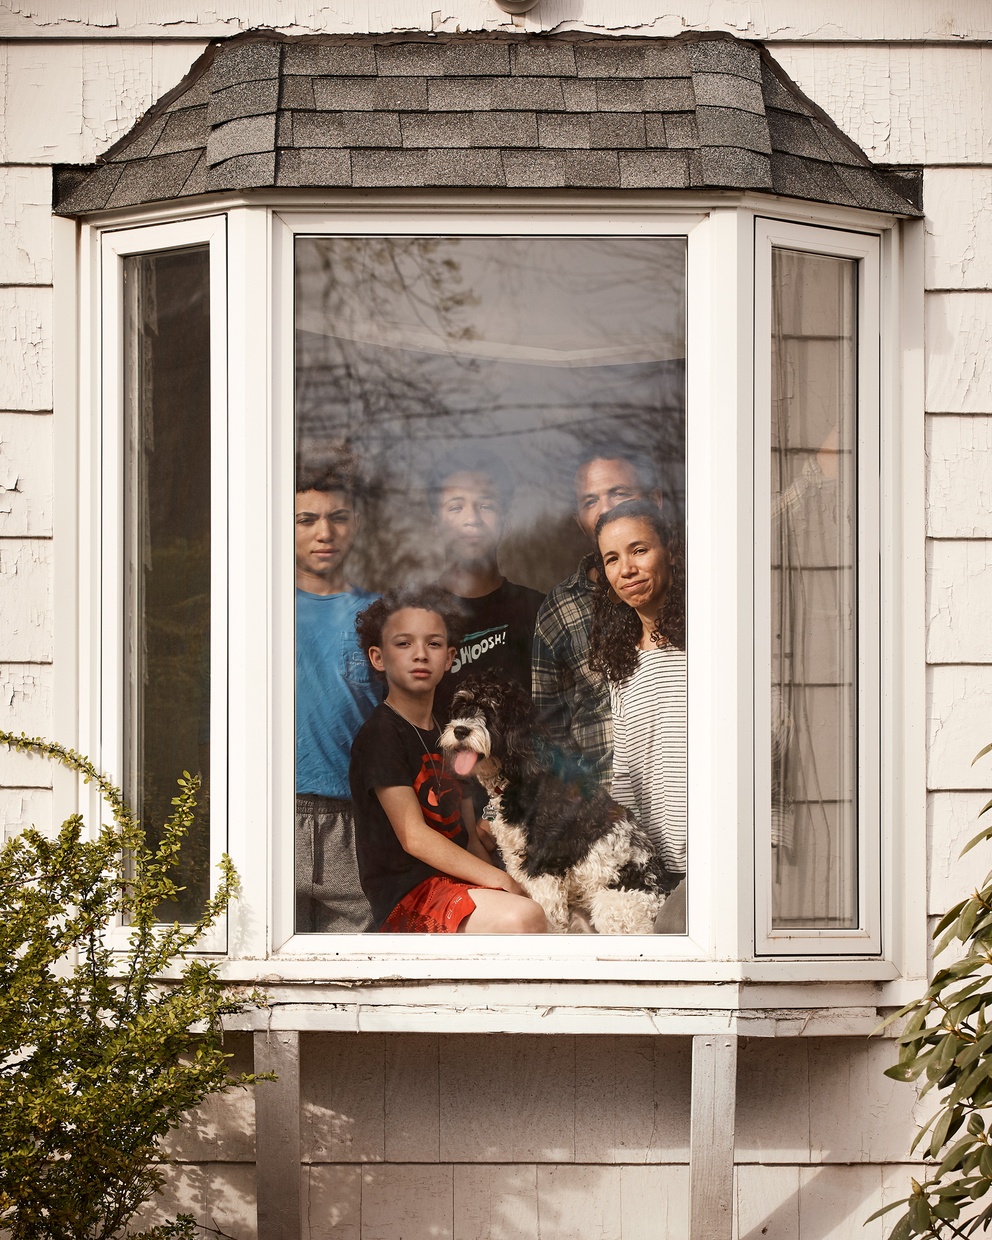 A photograph of a dark-skinned family, an adult male, adult female, and three boys, with a black and white dog looking out a white bay window.